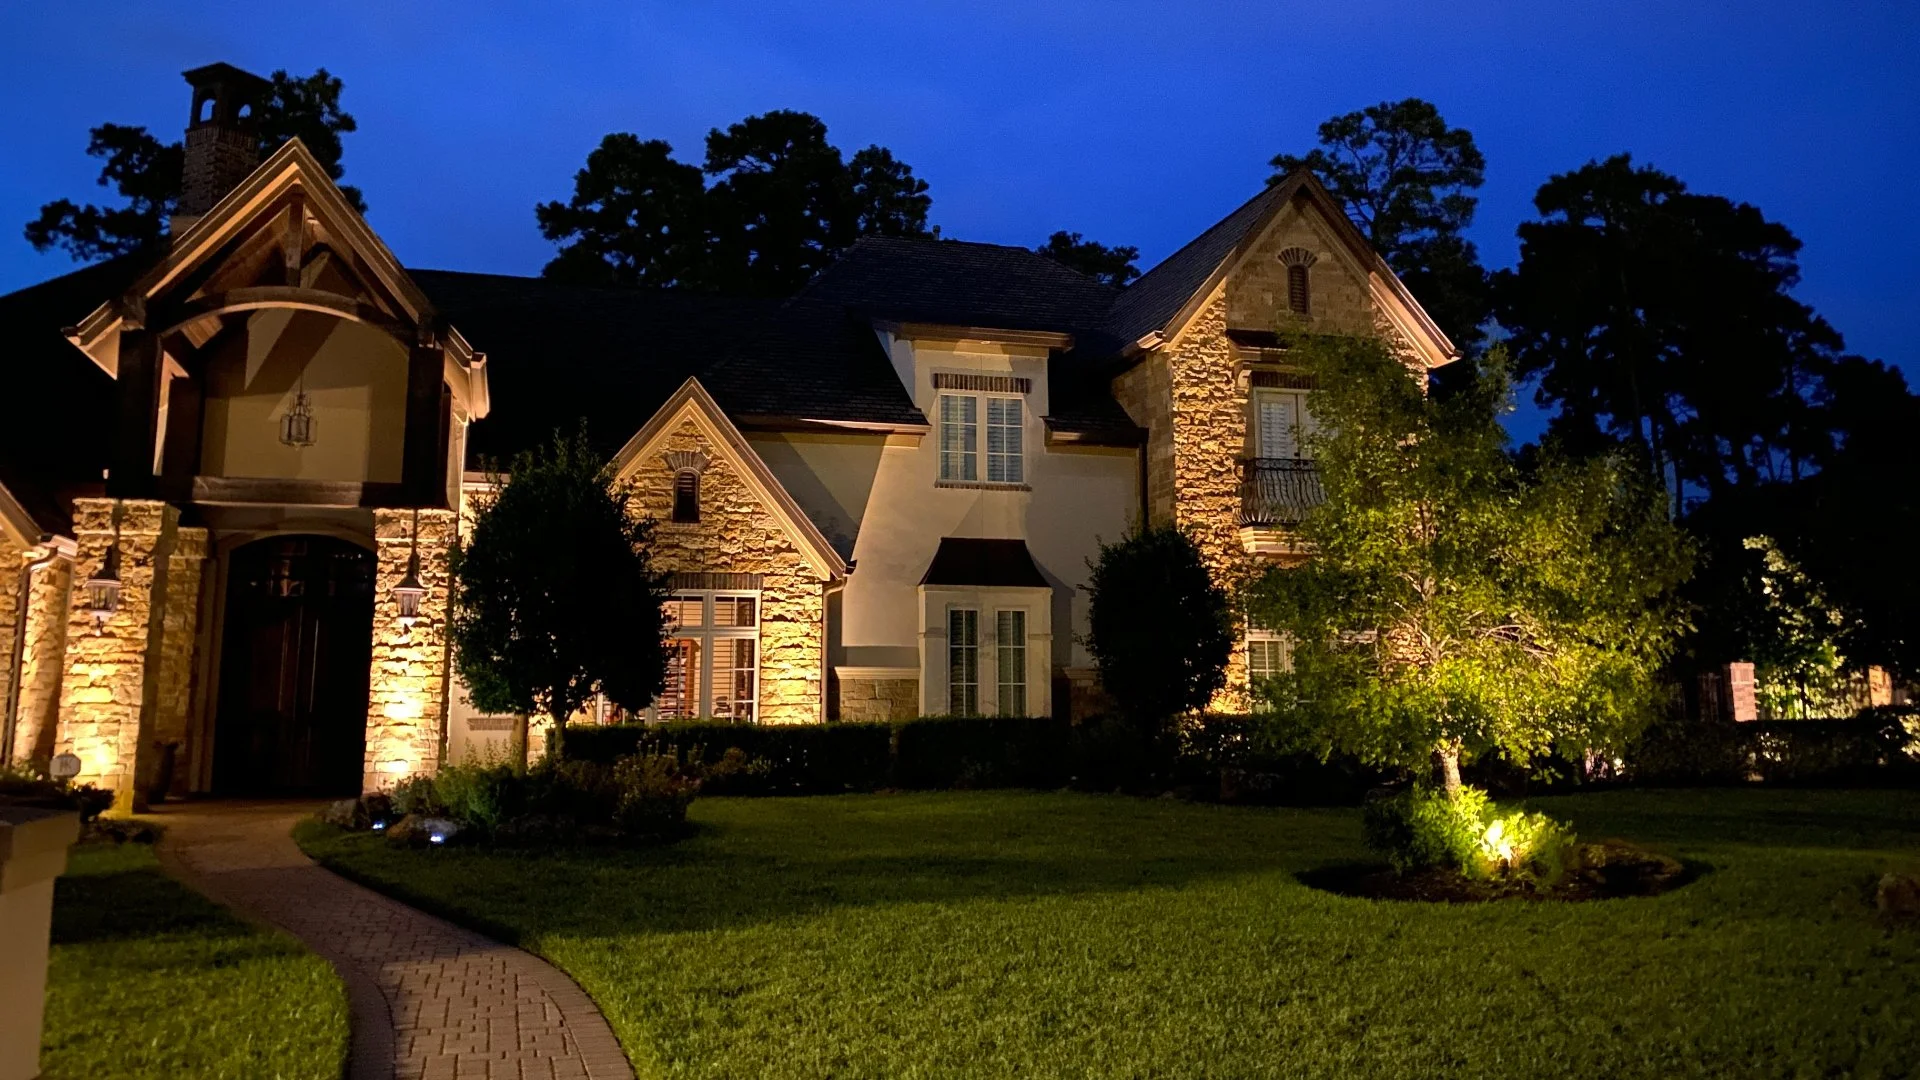 Professional Landscape Lighting Design & Installation - Here’s What To Expect